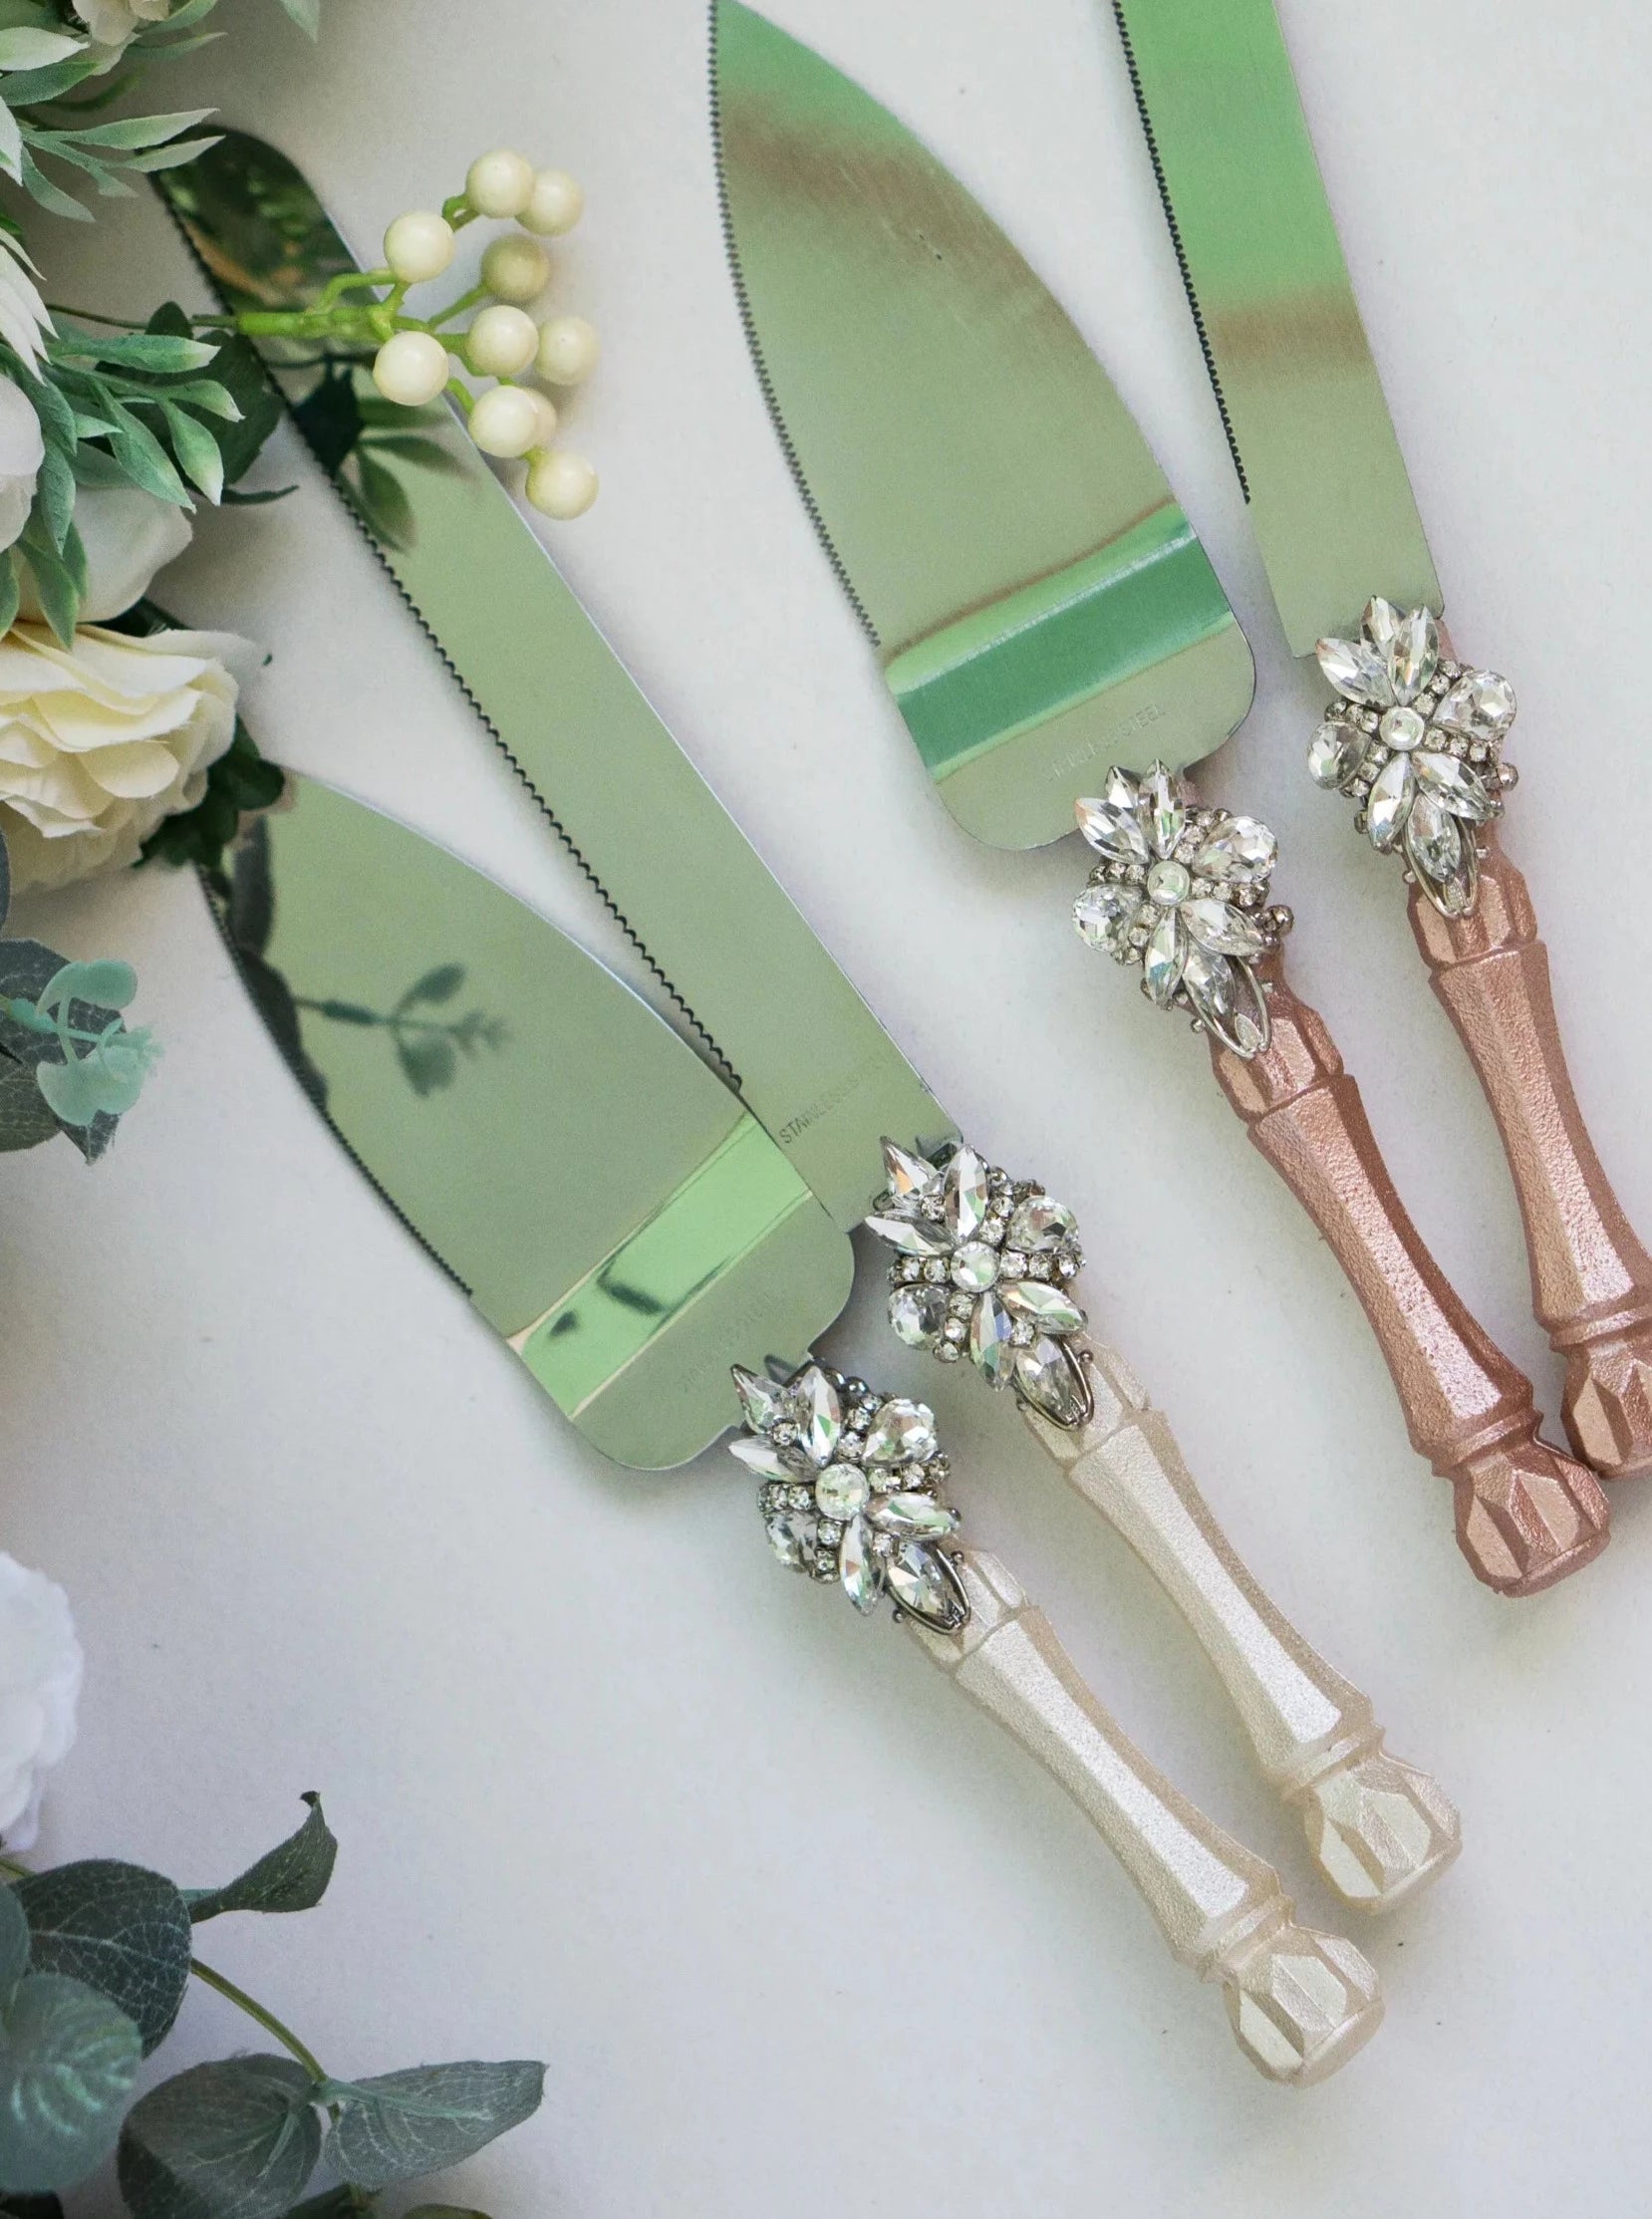 Silver crystals cake knife and server set